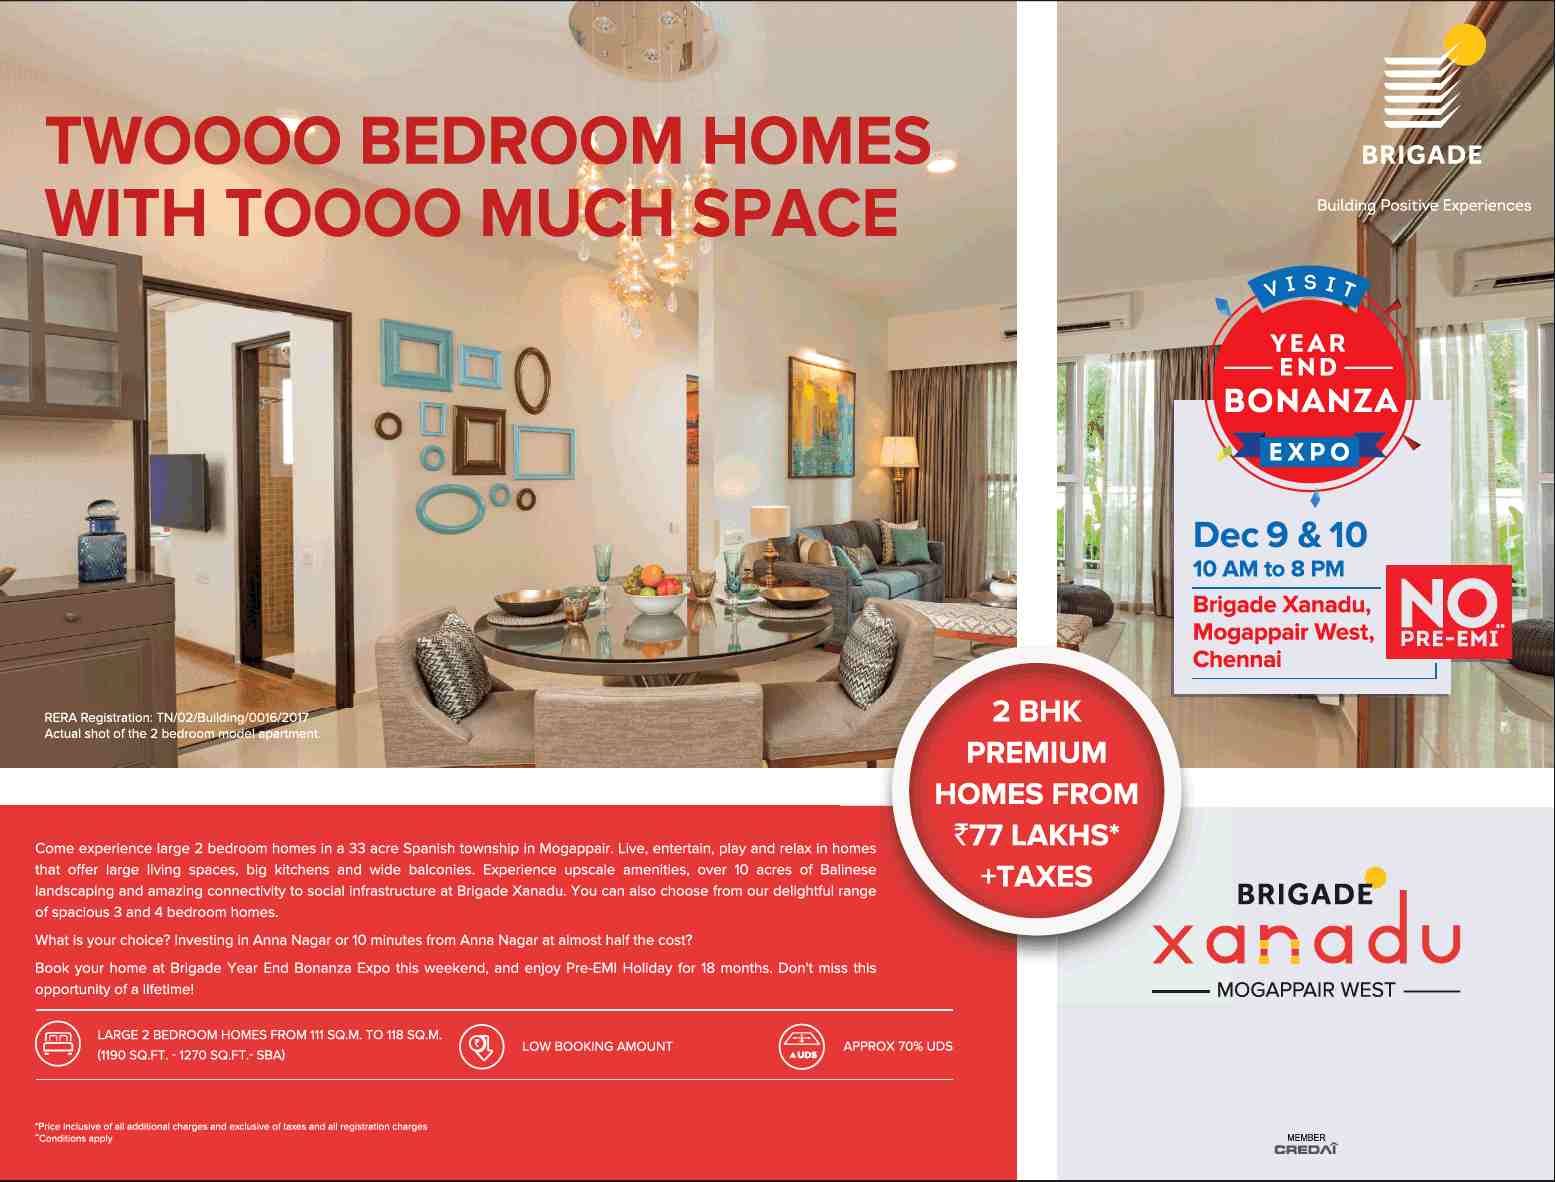 Live in two bedroom homes with too much space at Brigade Xanadu in Chennai Update